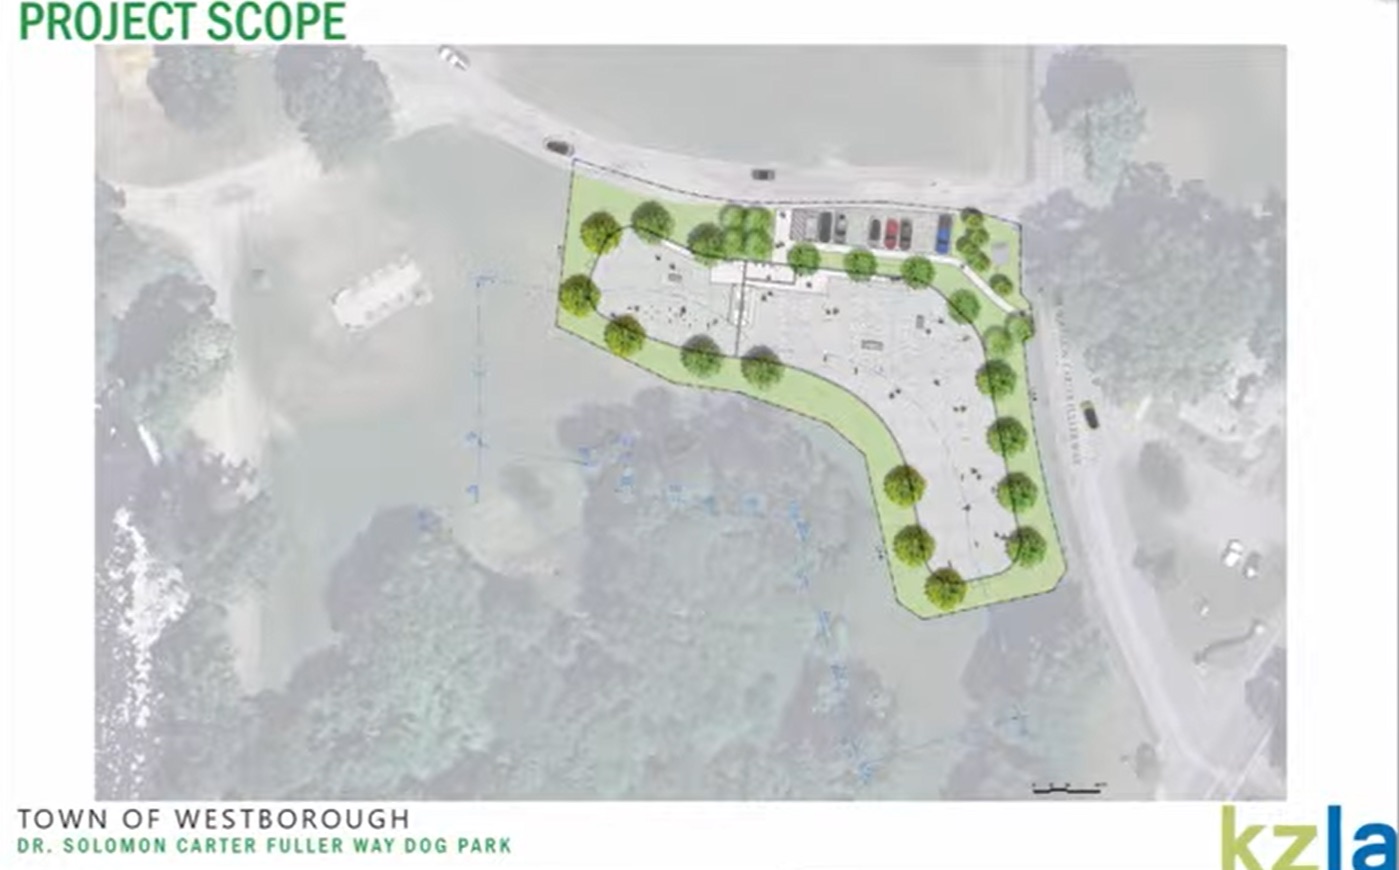 A first look at Westborough’s proposed dog park